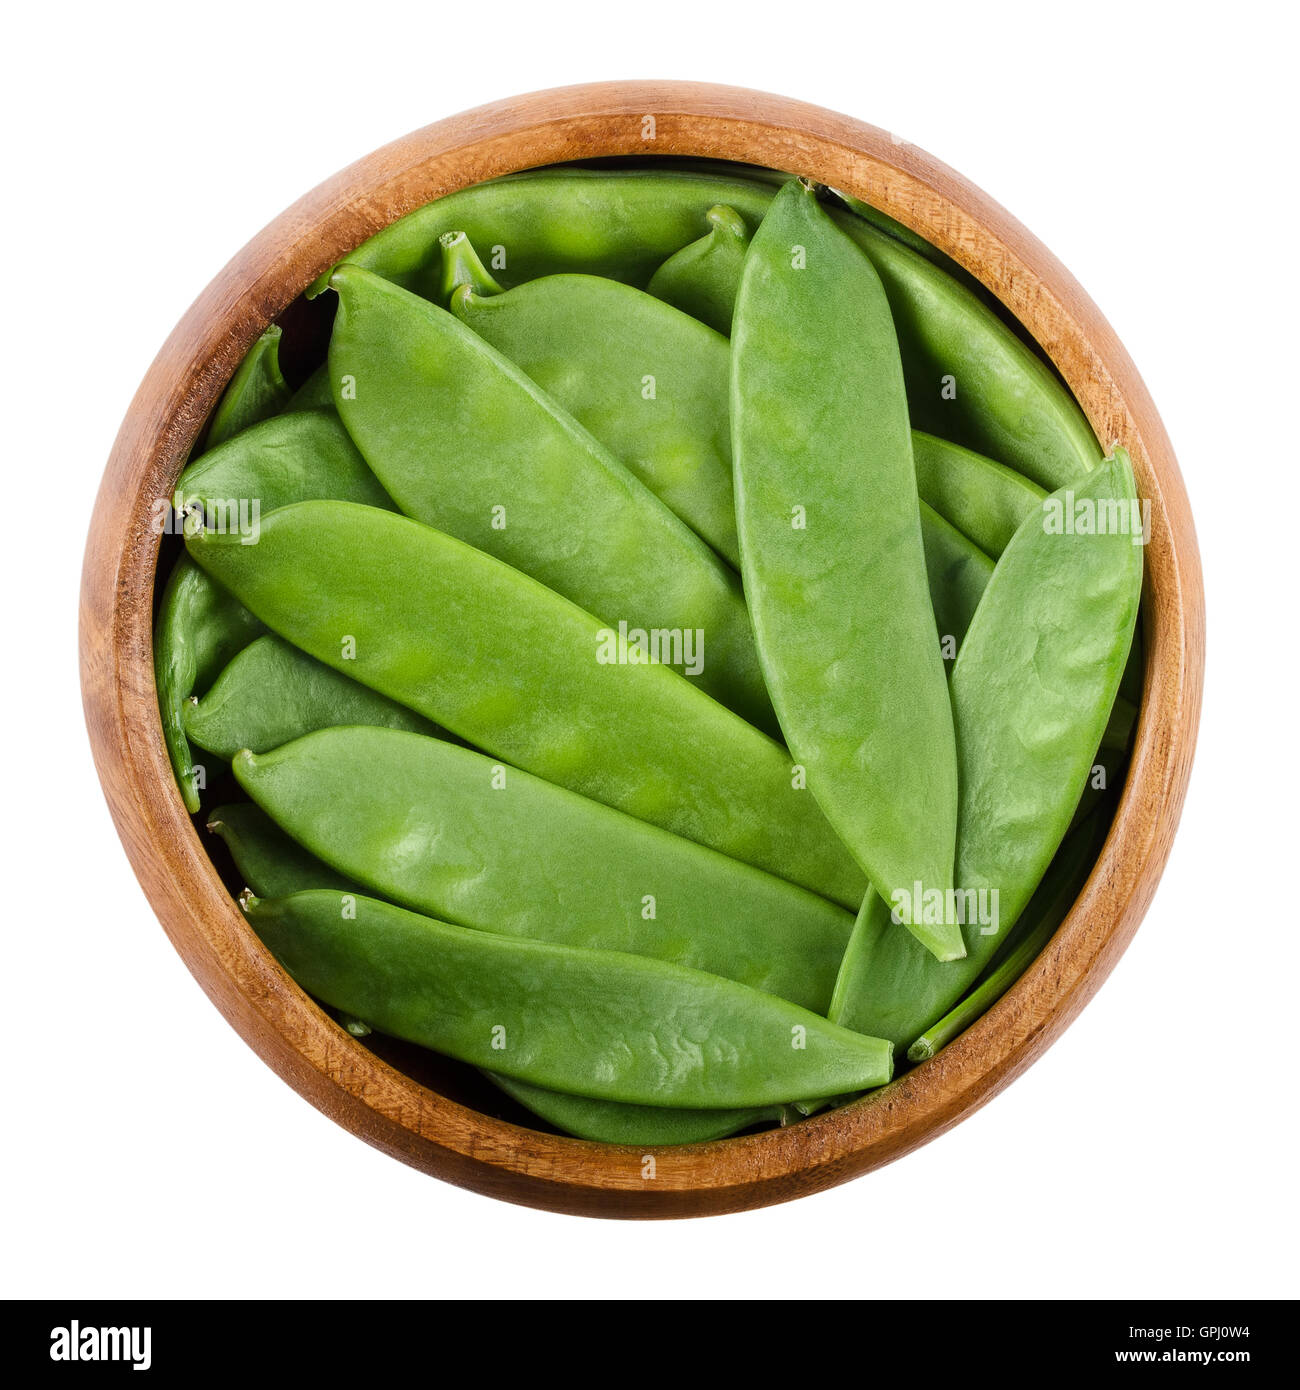 Snow peas in a wooden bowl on white background. Pisum sativum saccharatum, a green legume and variety of pea, eaten whole. Stock Photo